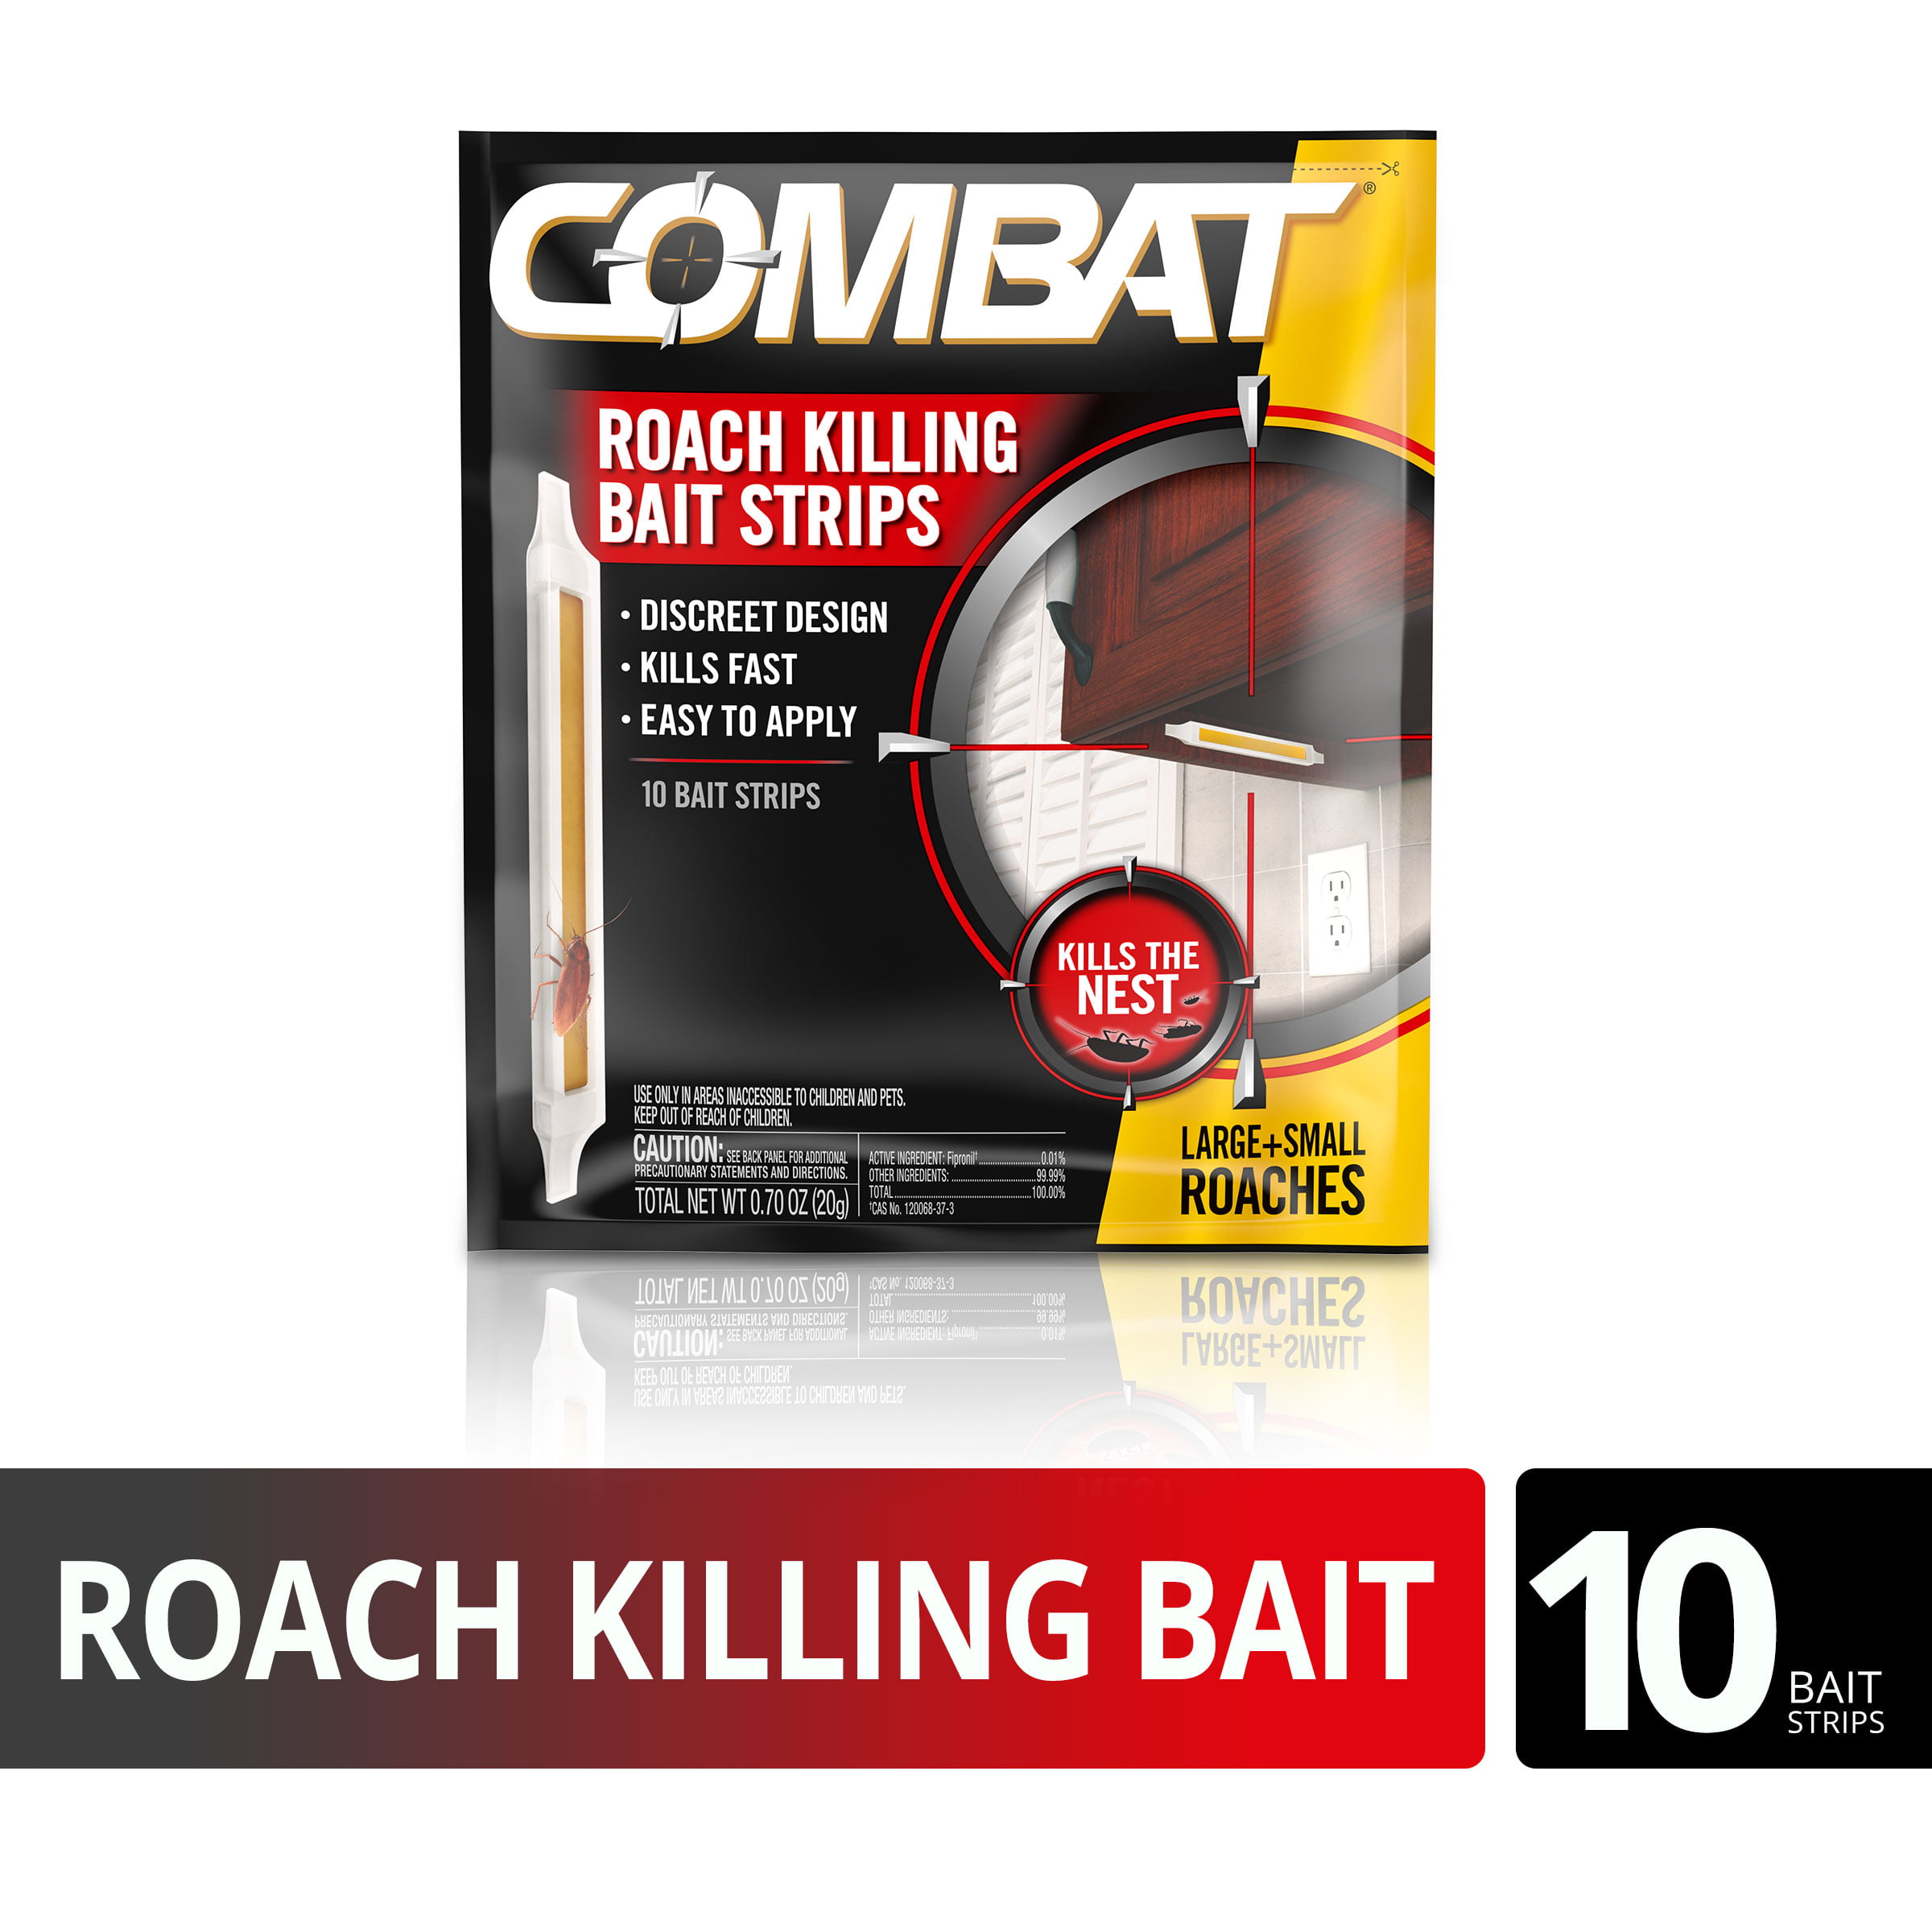 Pack of 2 10 Count Combat Roach Killing Bait Strips 